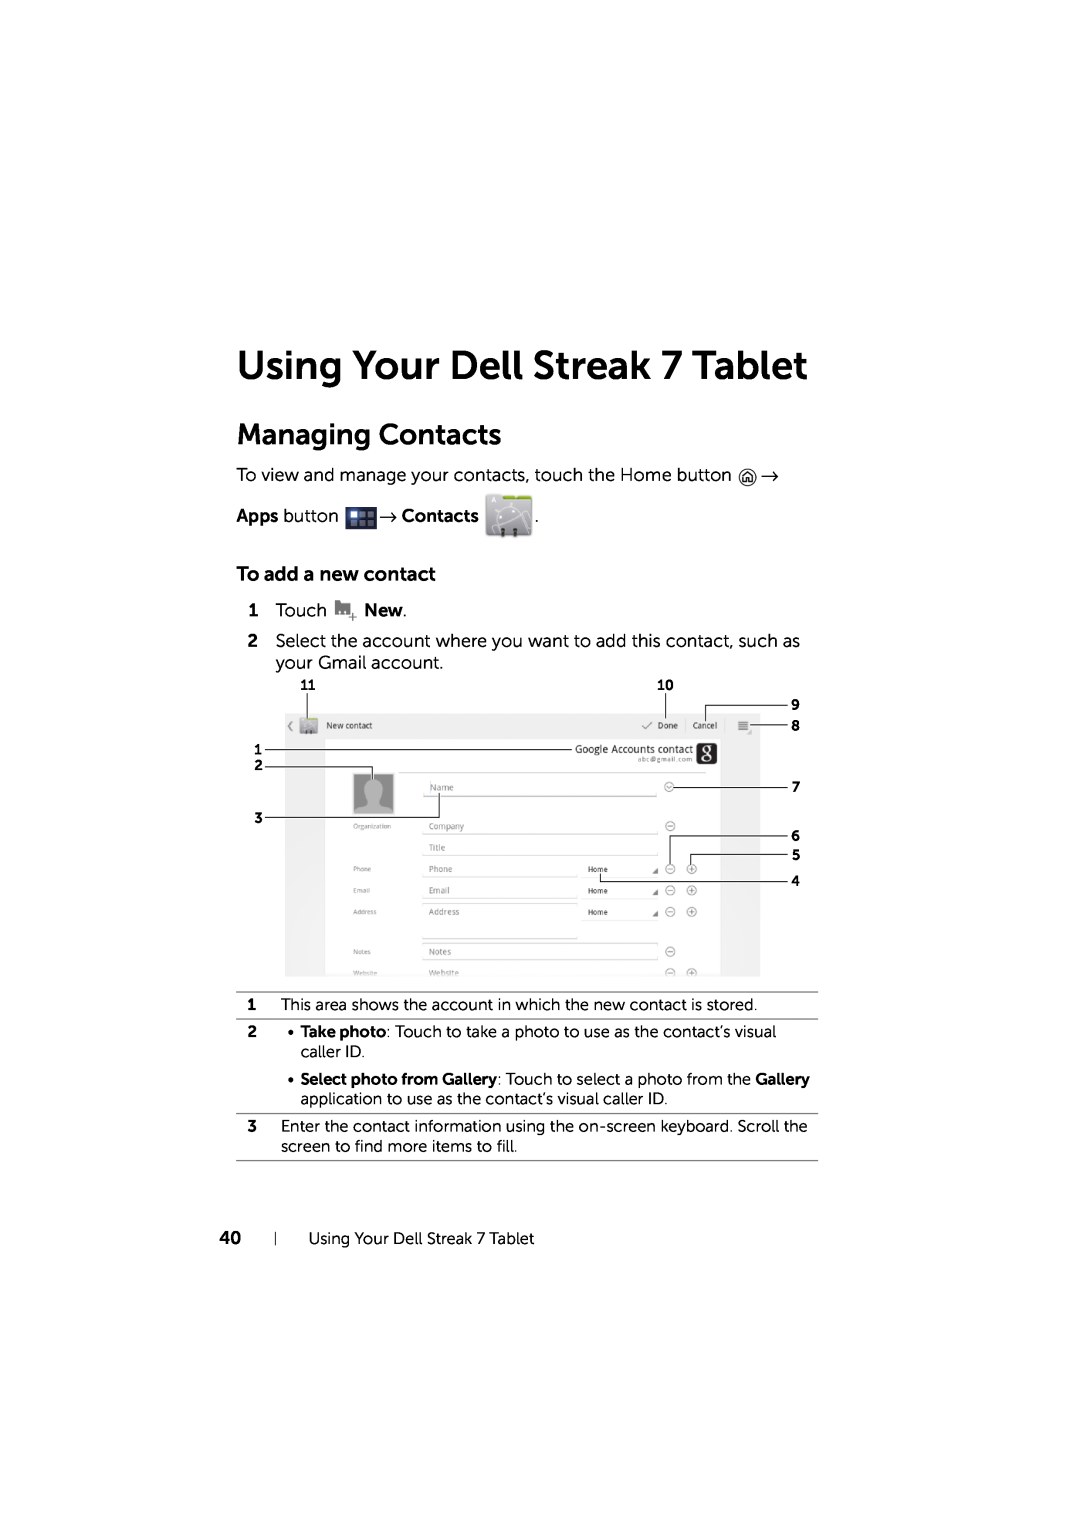 Dell LG7_bk0 user manual Using Your Dell Streak 7 Tablet, Managing Contacts, To add a new contact 